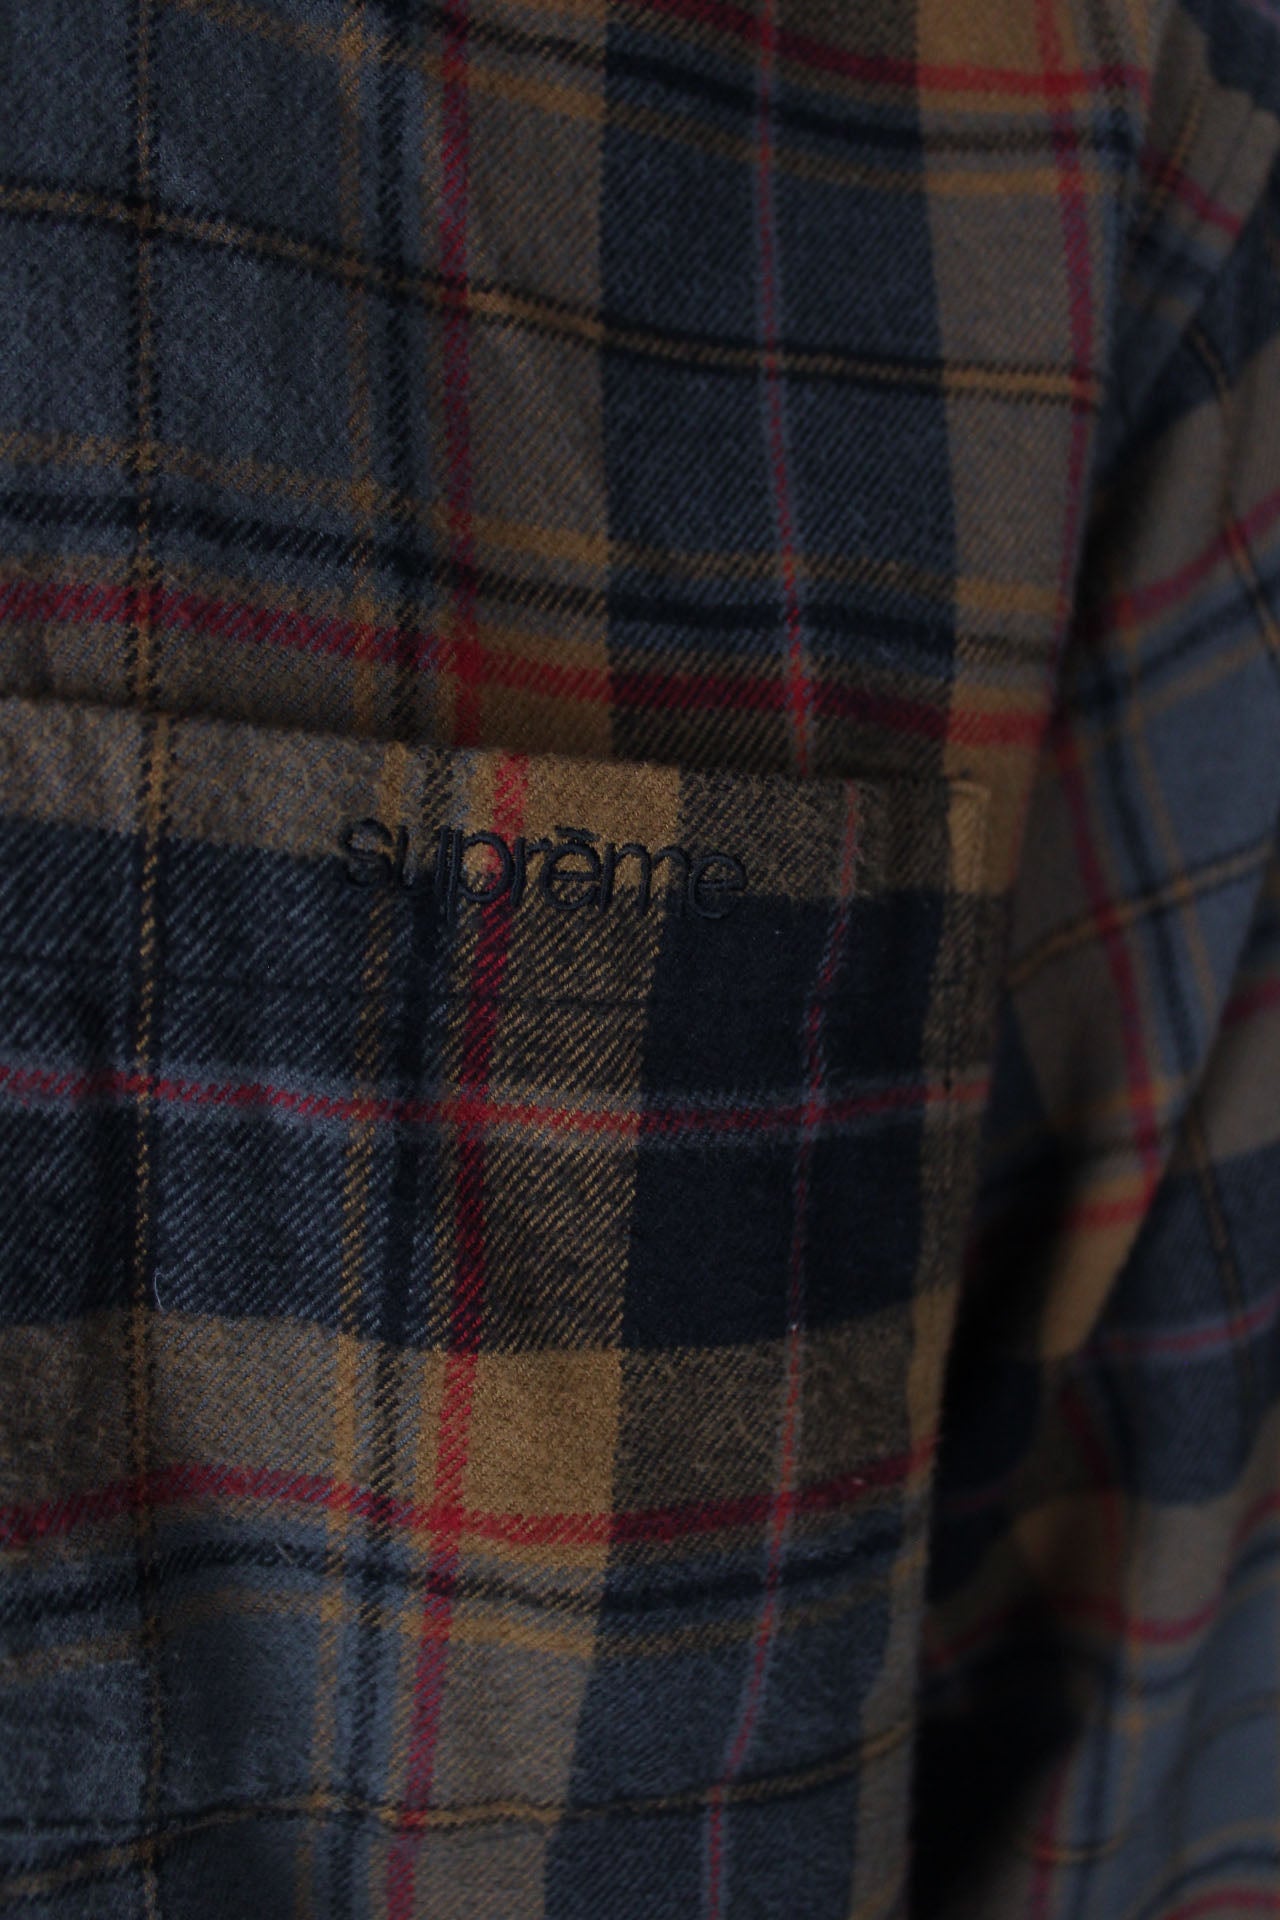 detail view with 'supreme' logo embroidered at left breast pocket of shirt.